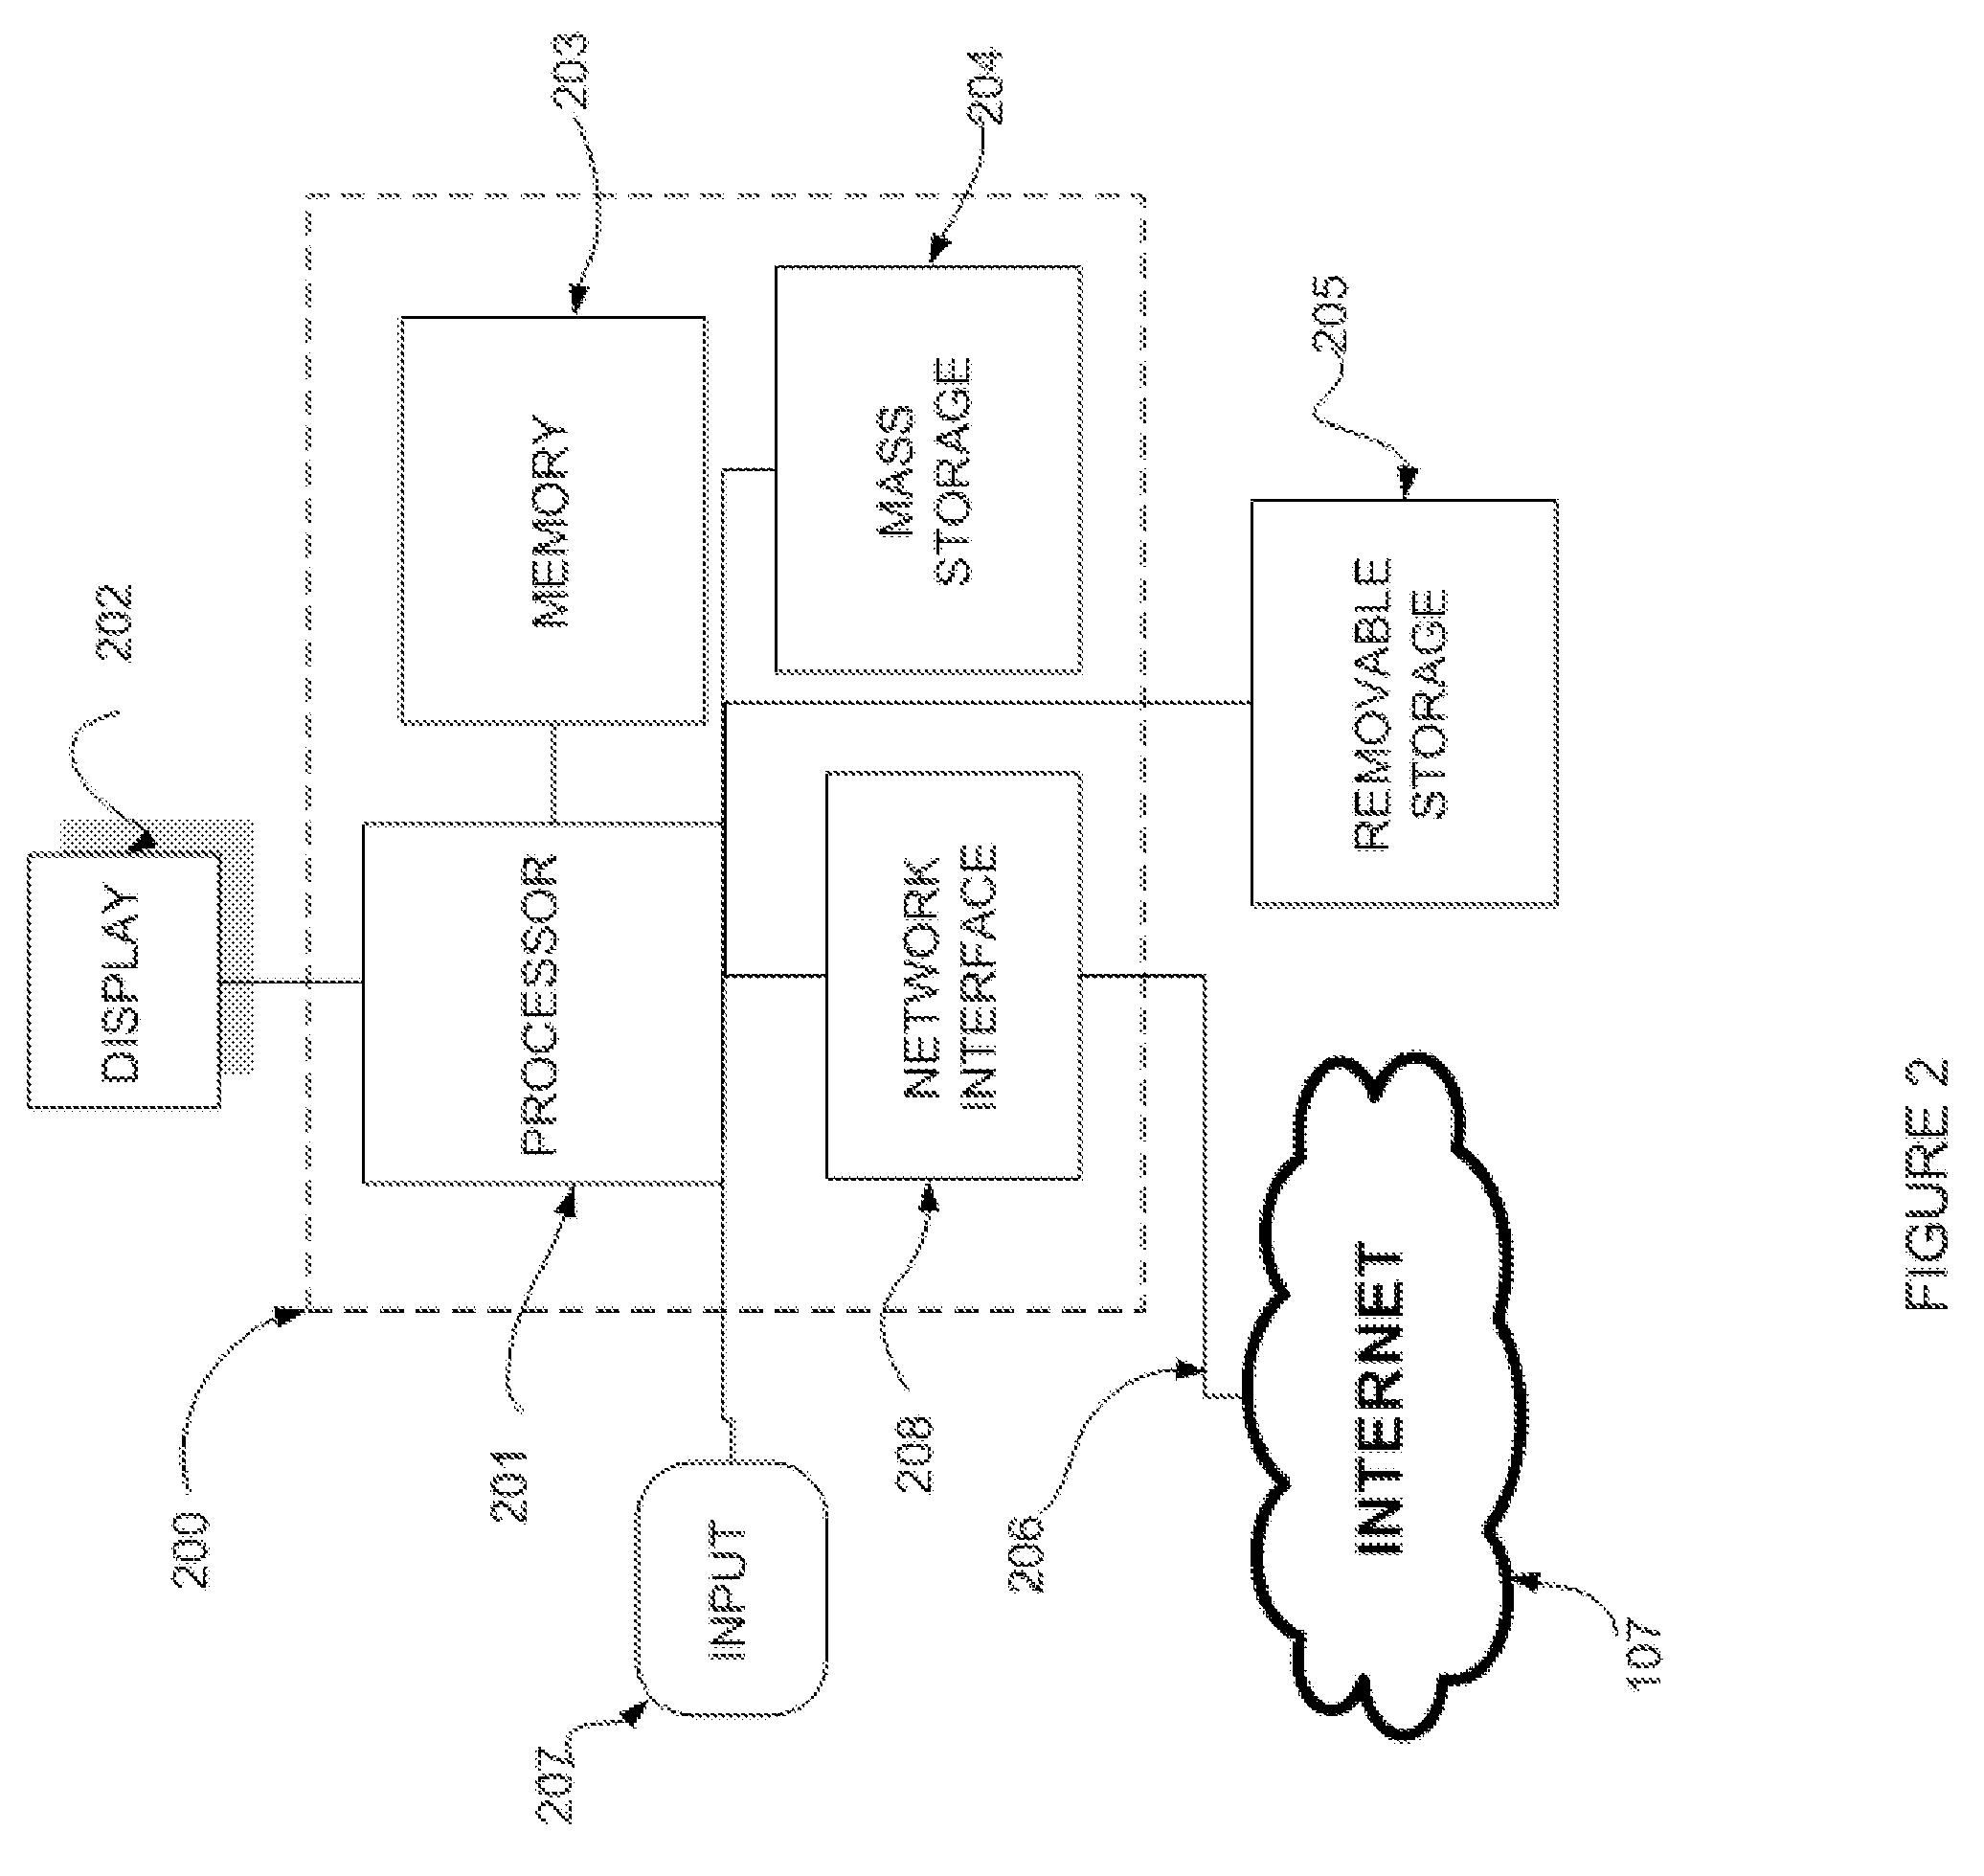 Network File Transfer and Caching System